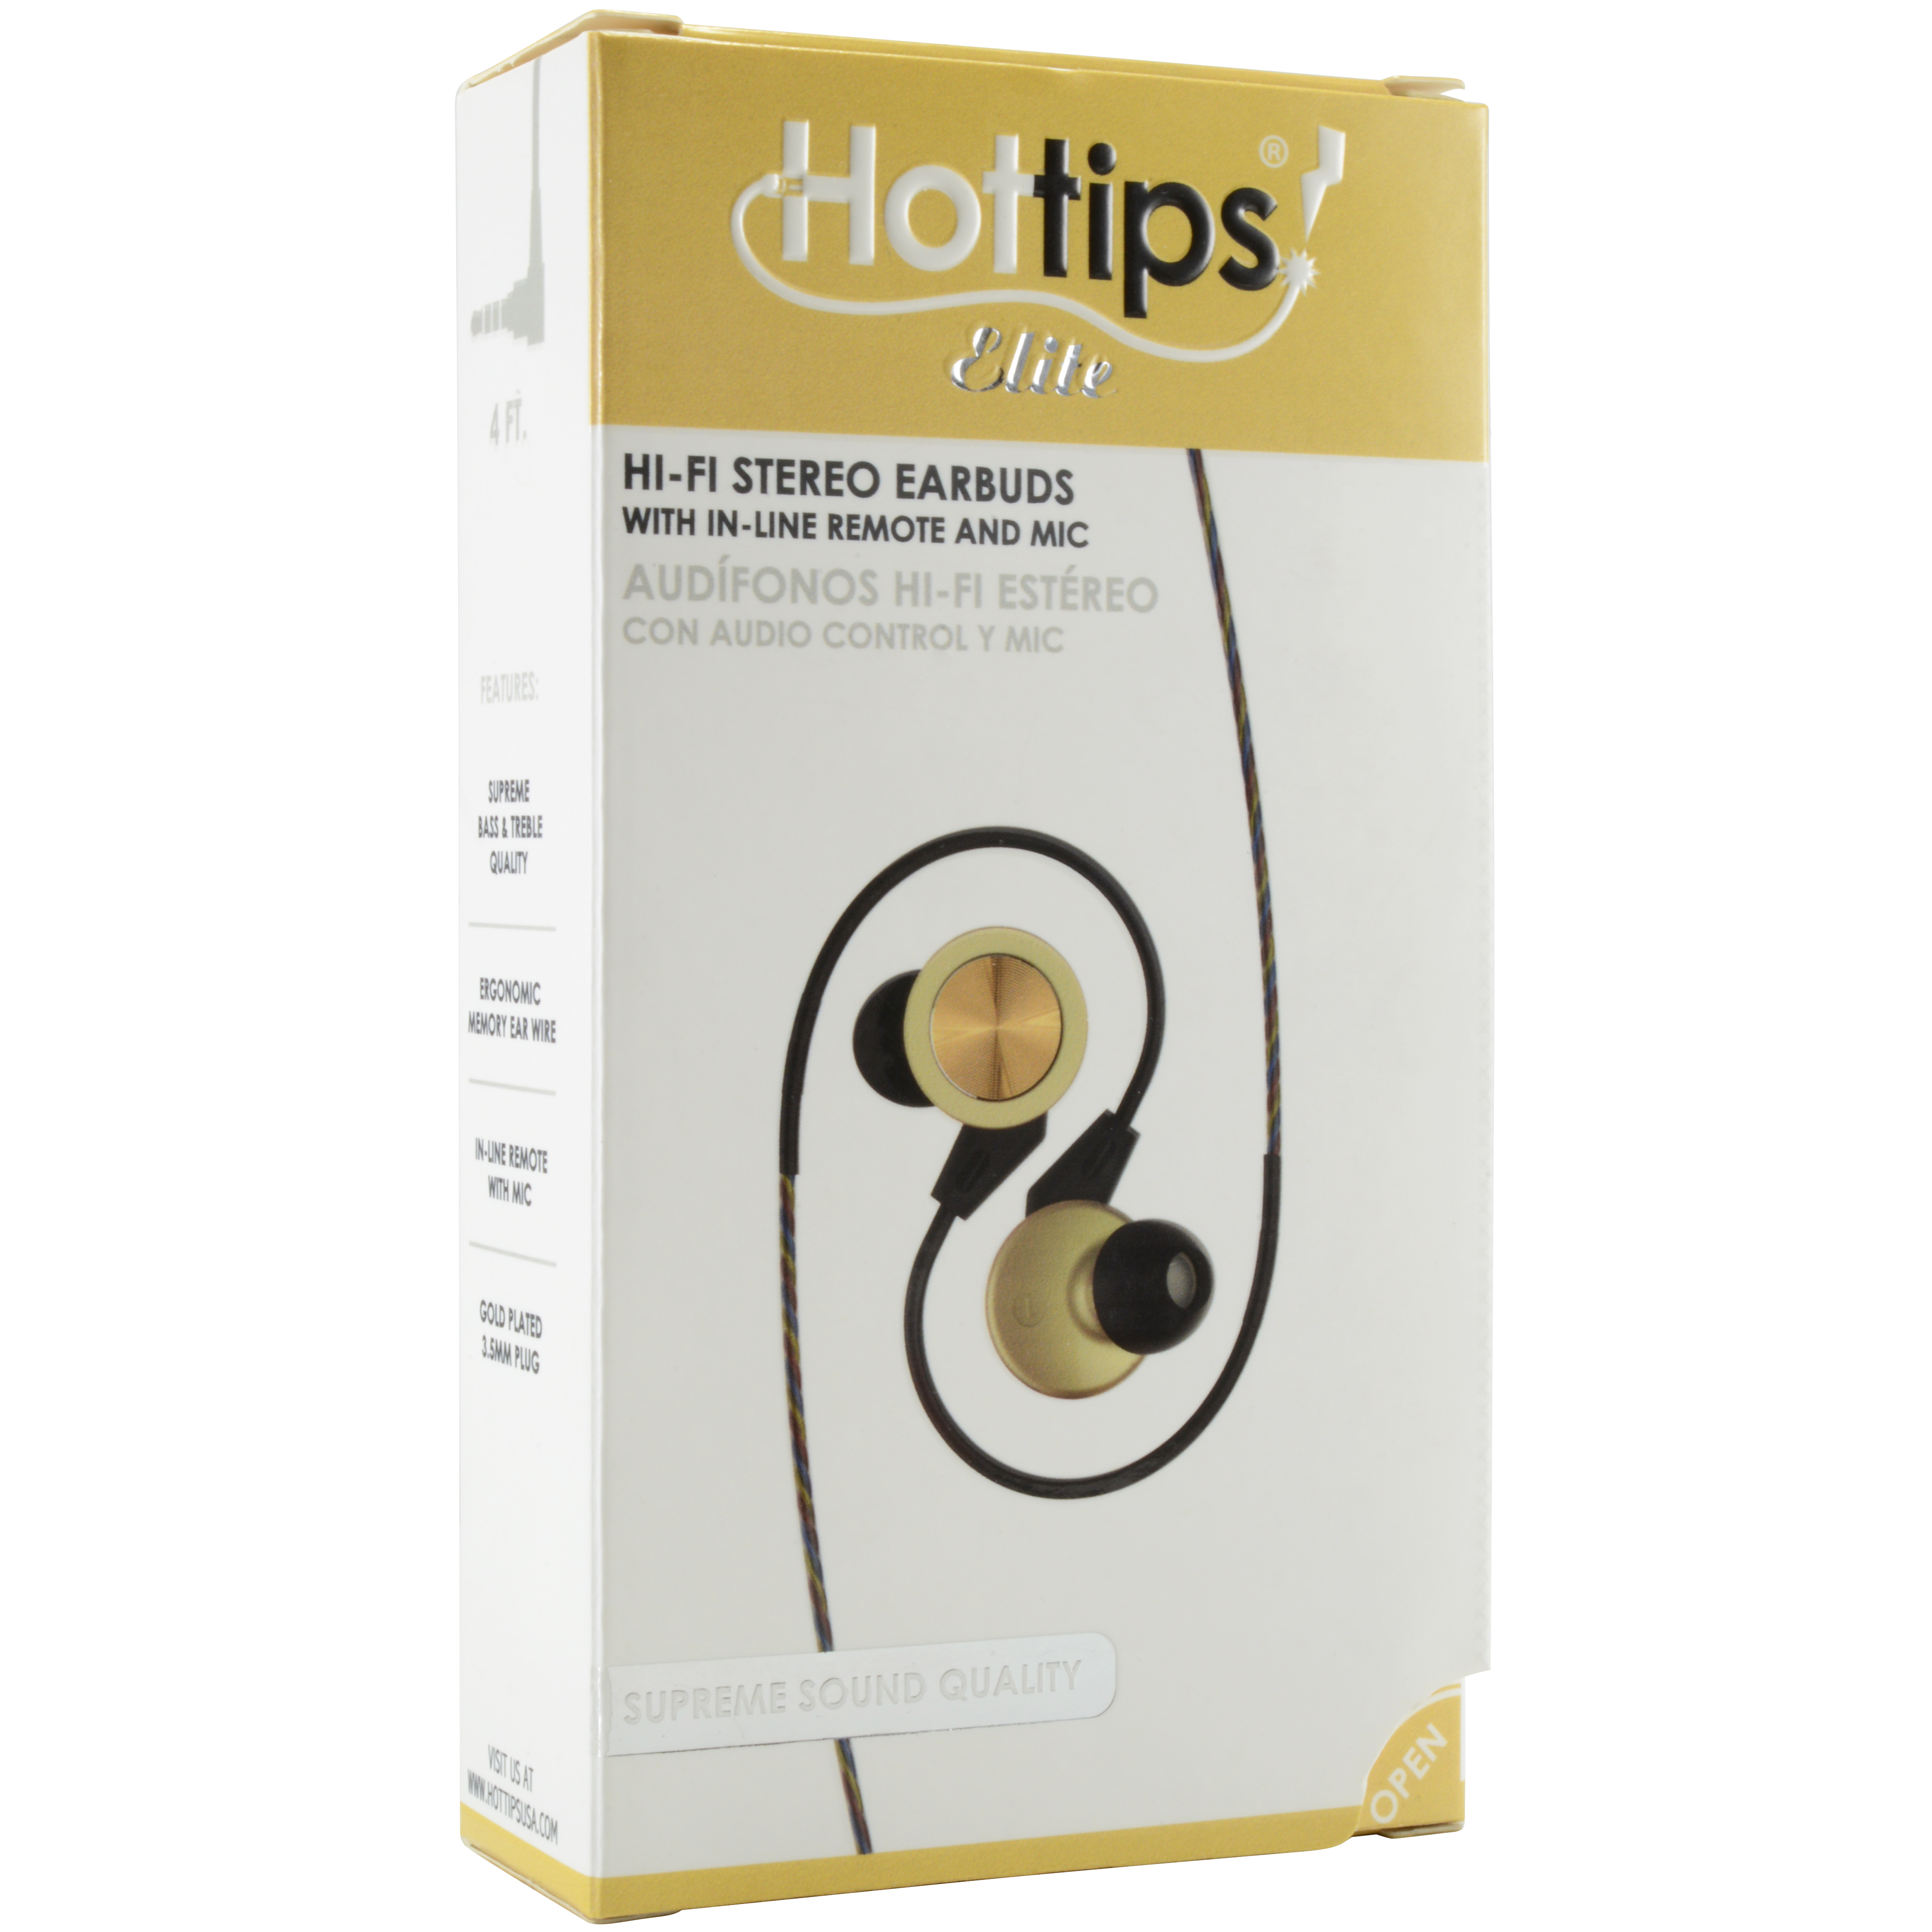 Hottips! HiFi Earbuds by Navajo Incorporated